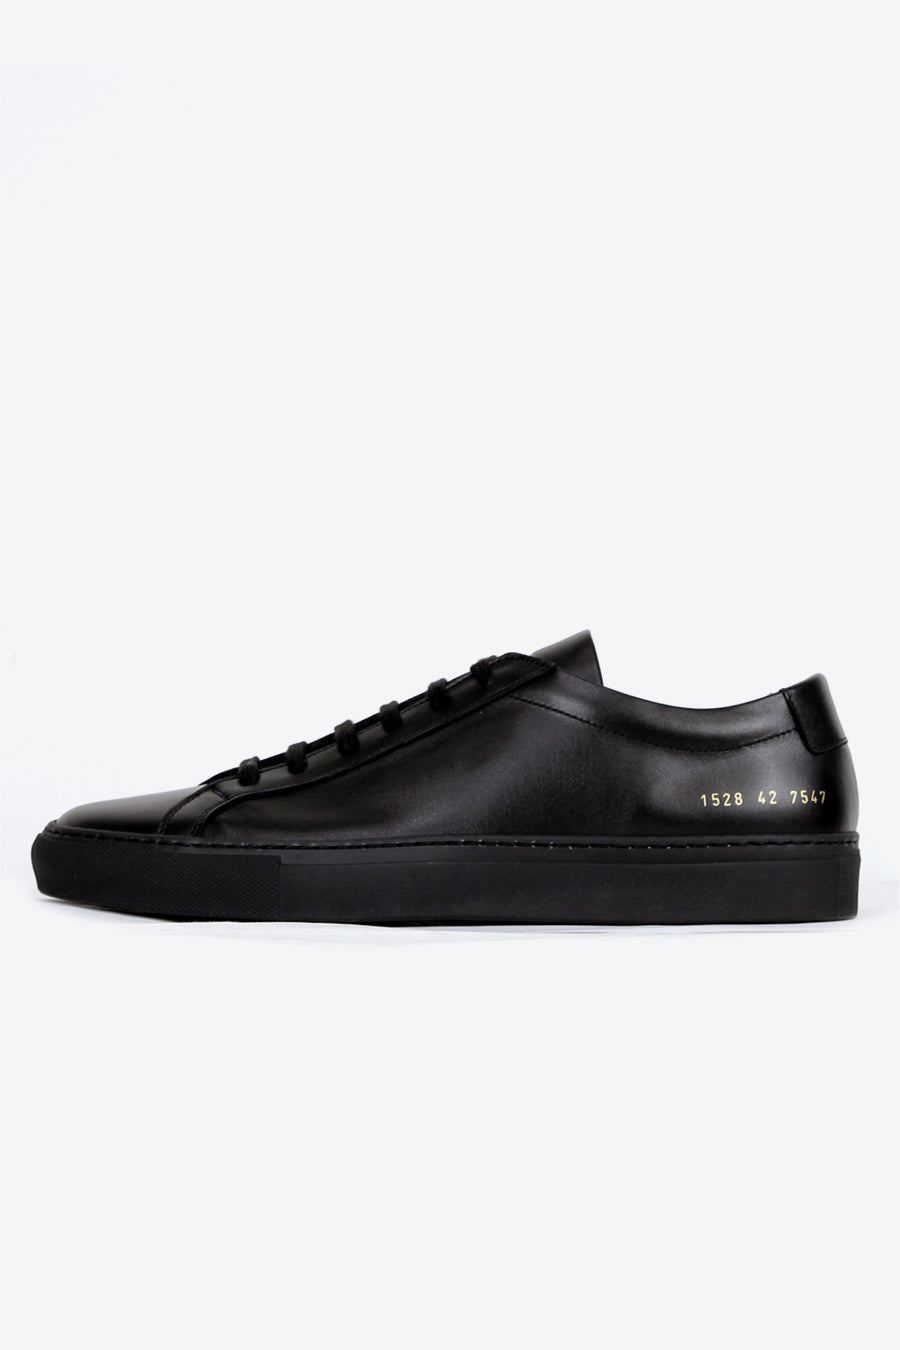 COMMON PROJECTS | ORIGINAL ACHILLES LOW 1528 / BLACK 7547 アキレス 